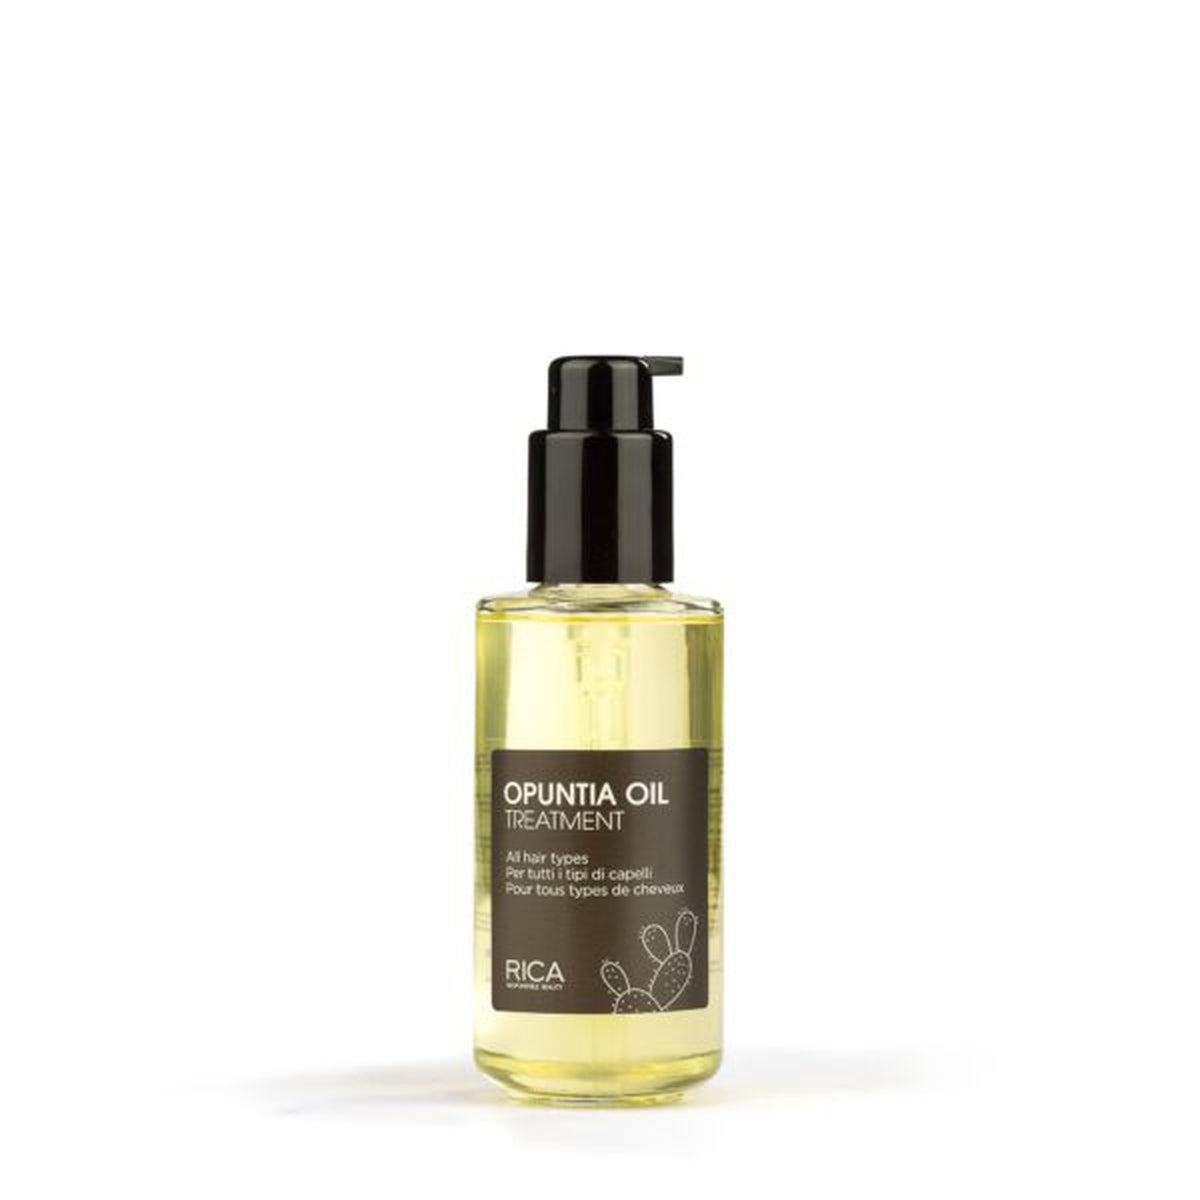 Rica Opuntia Oil Treatment for All Hair Types